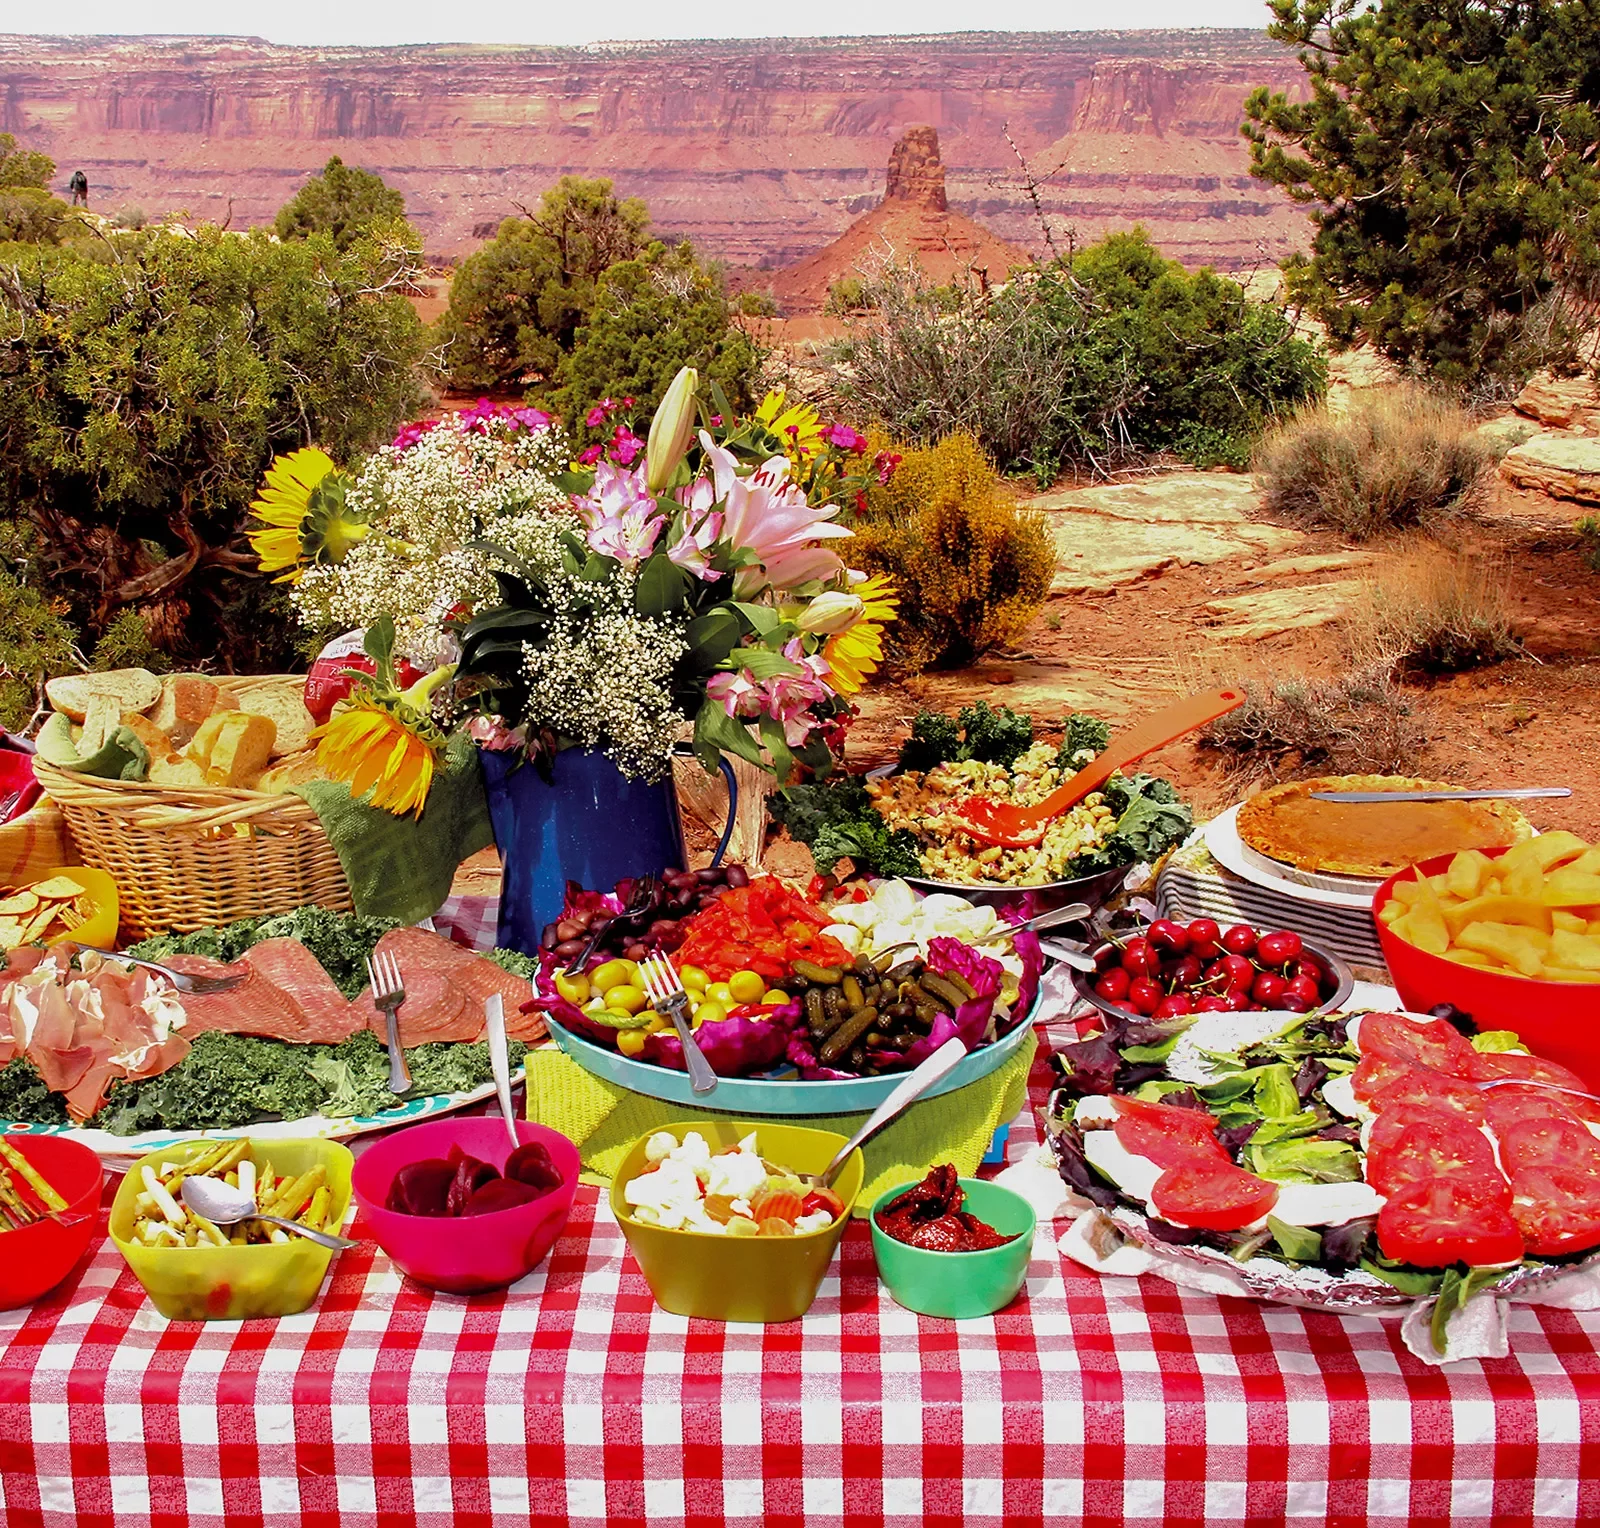 Picnic table spread with mountains in background